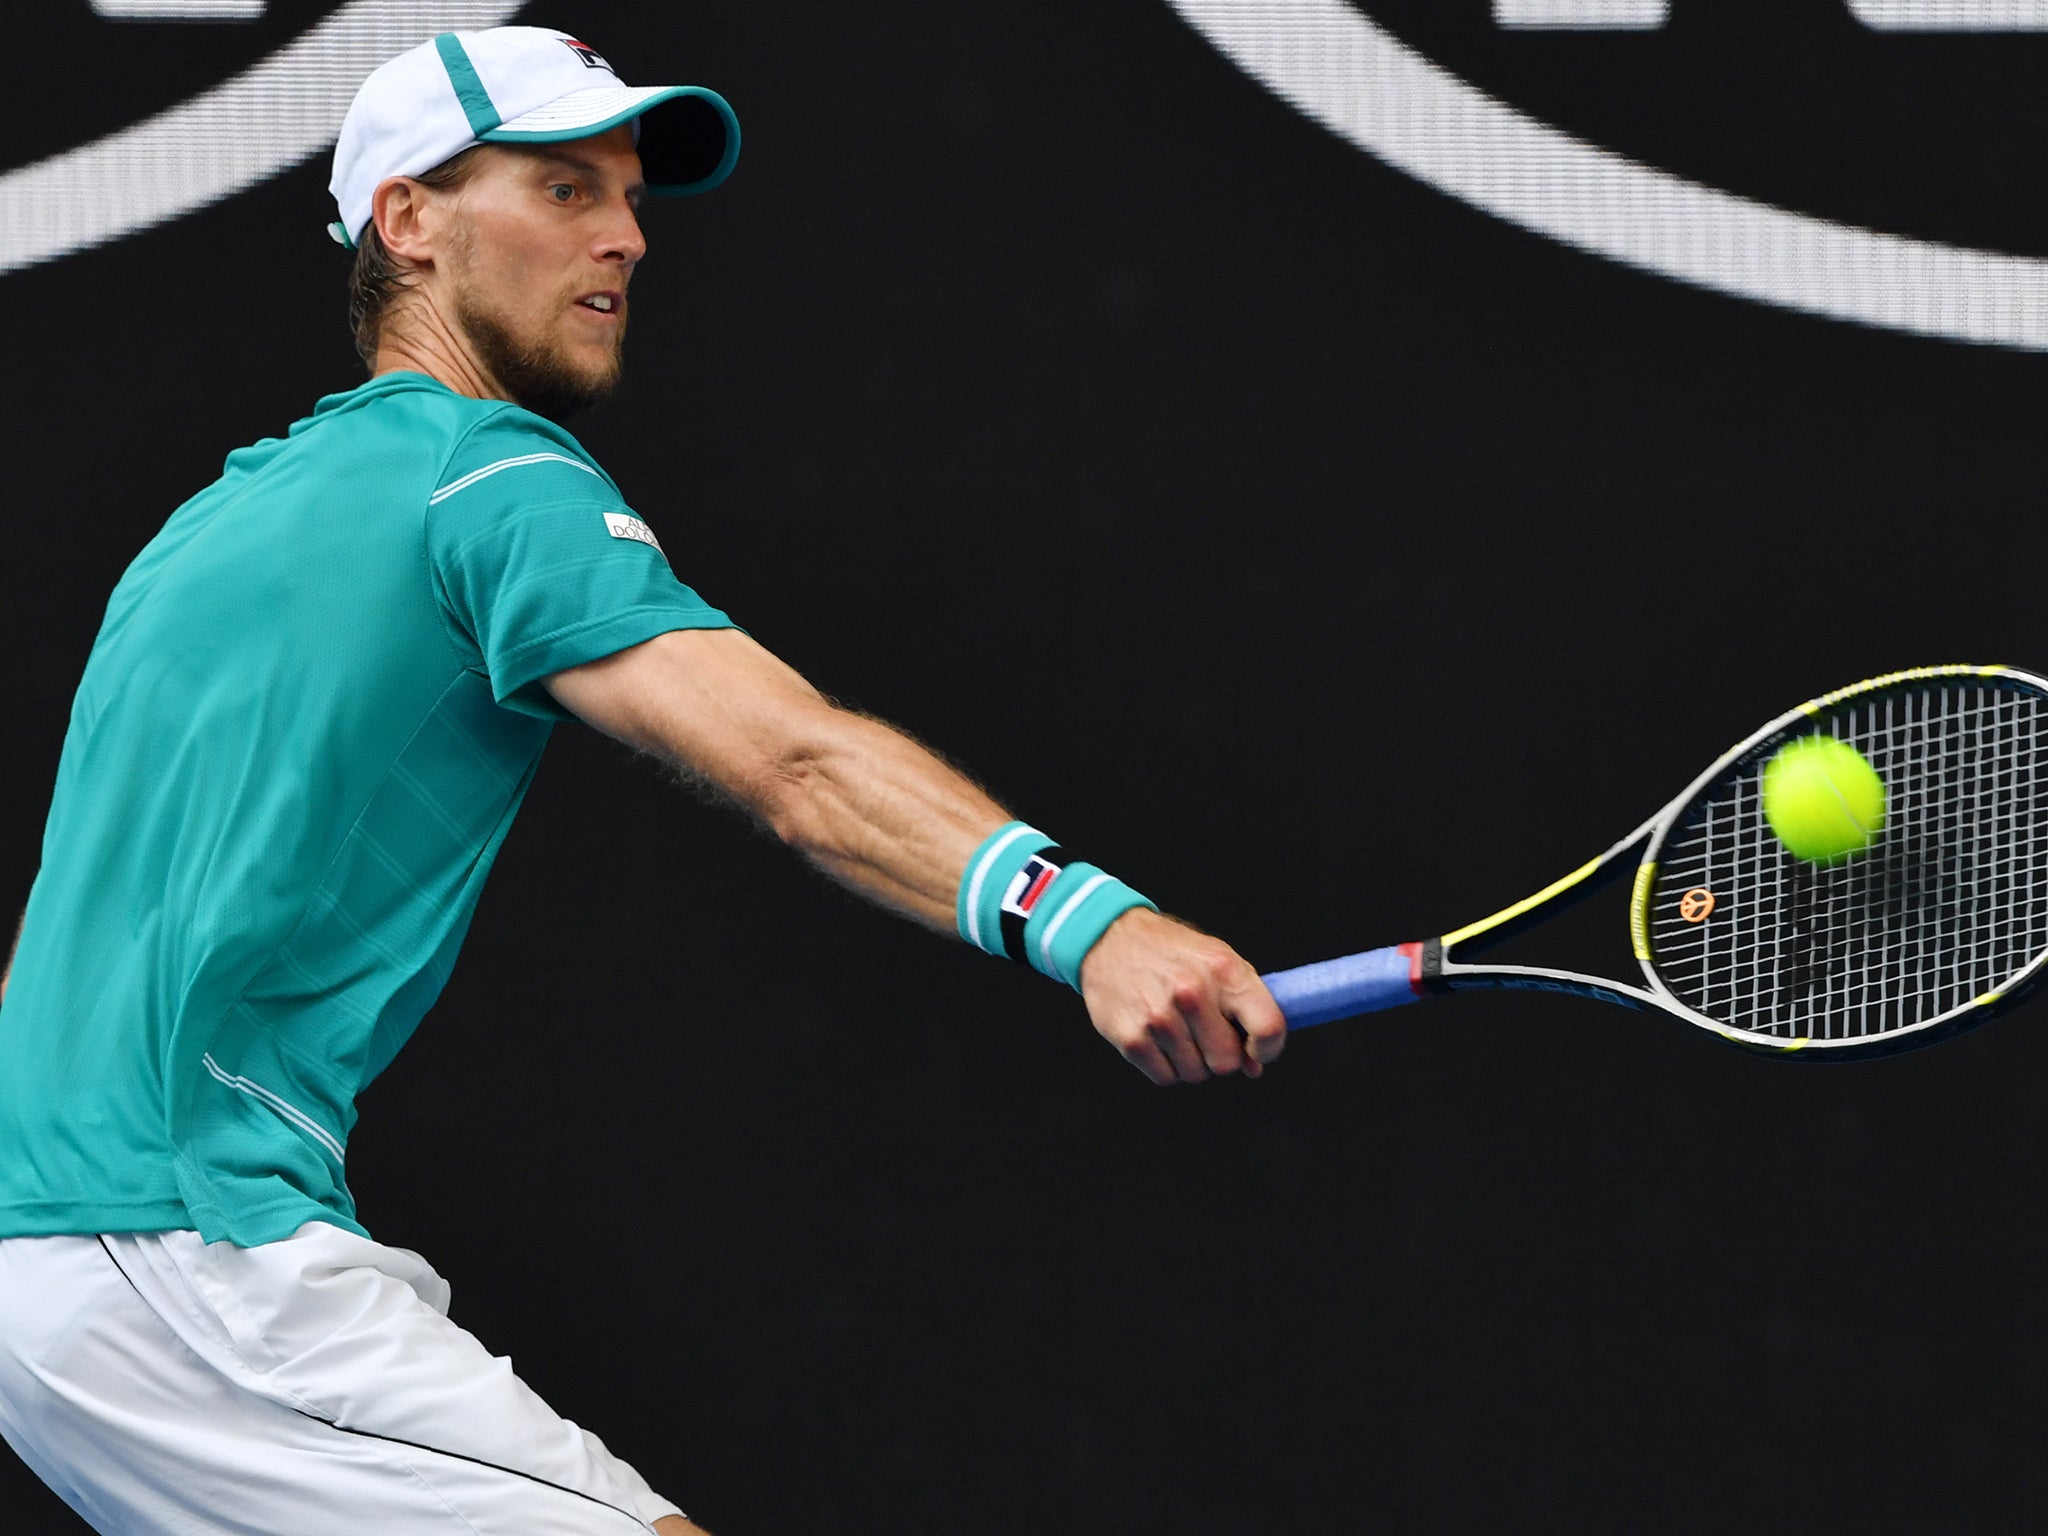 Andreas Seppi has no answer for Edmund's dominant serves and forehands